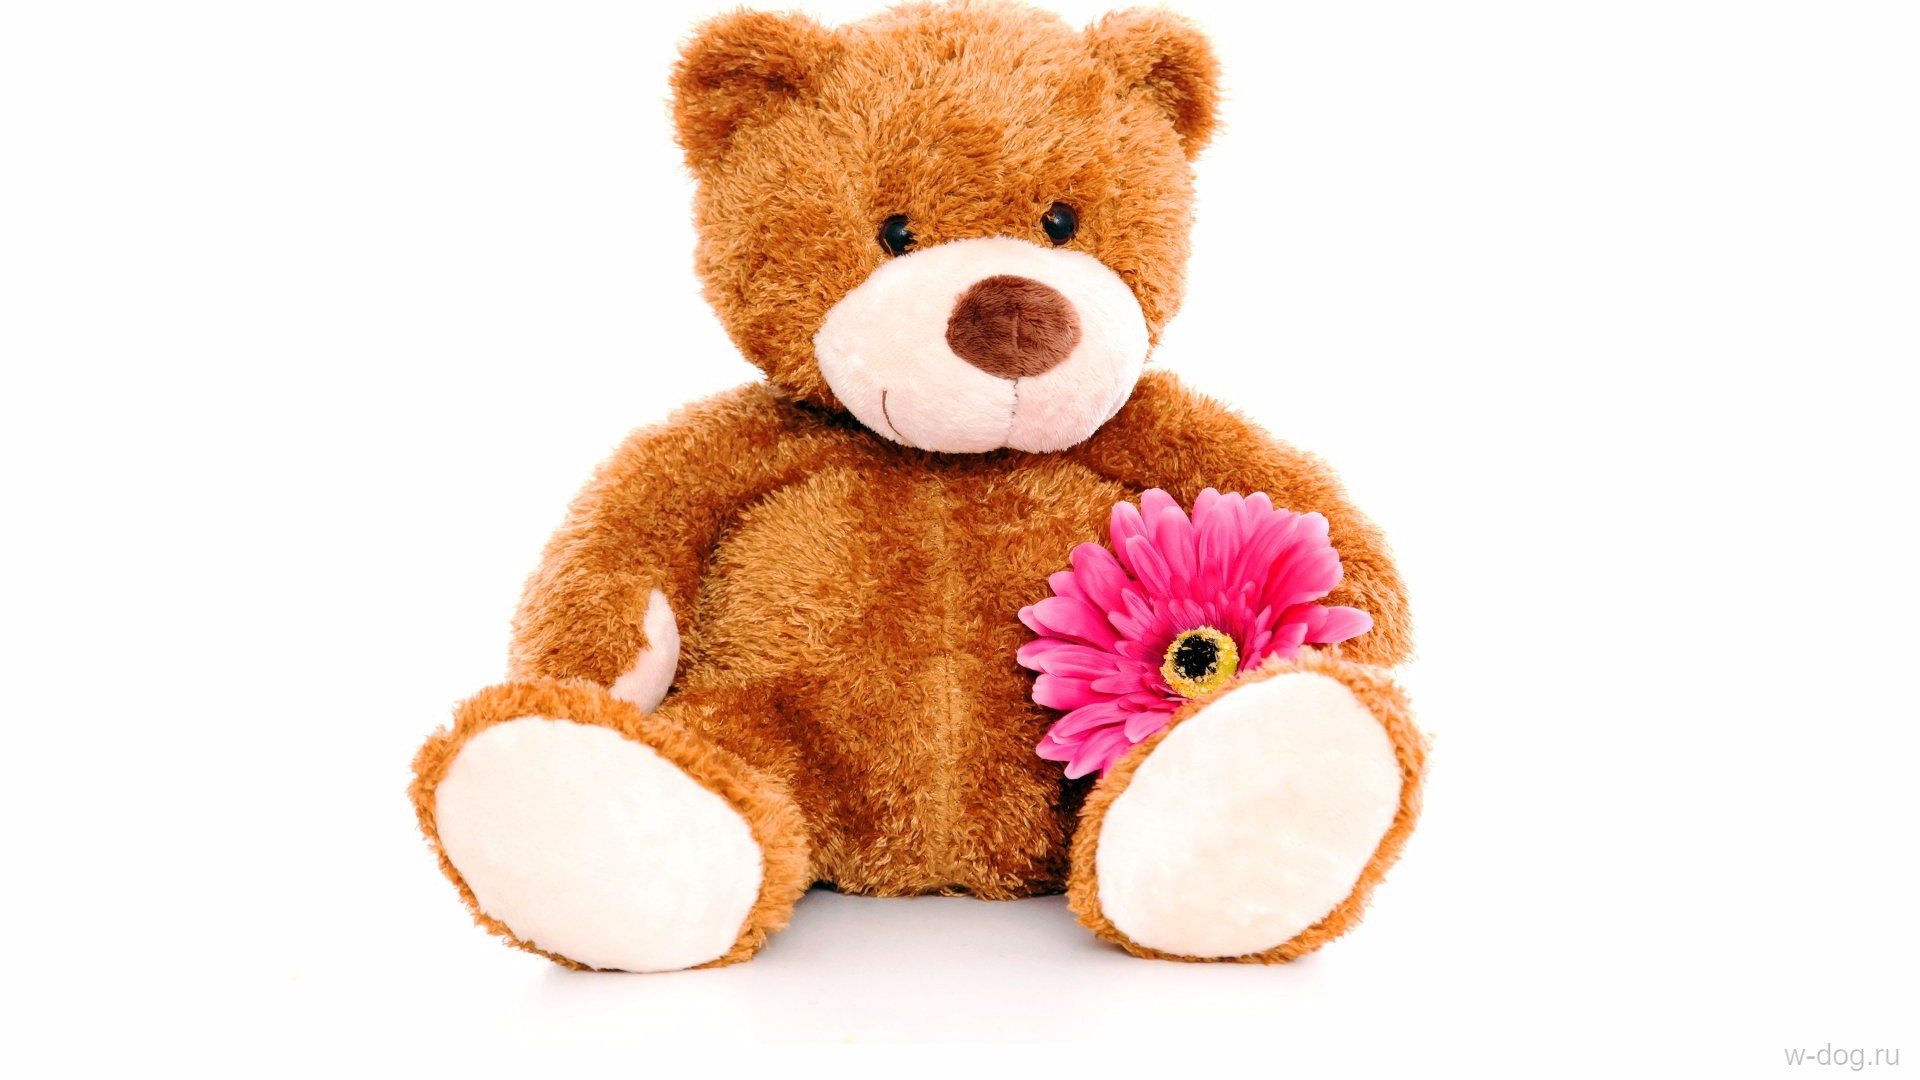 Teddy Bear Wallpapers Images Photos Pictures Backgrounds